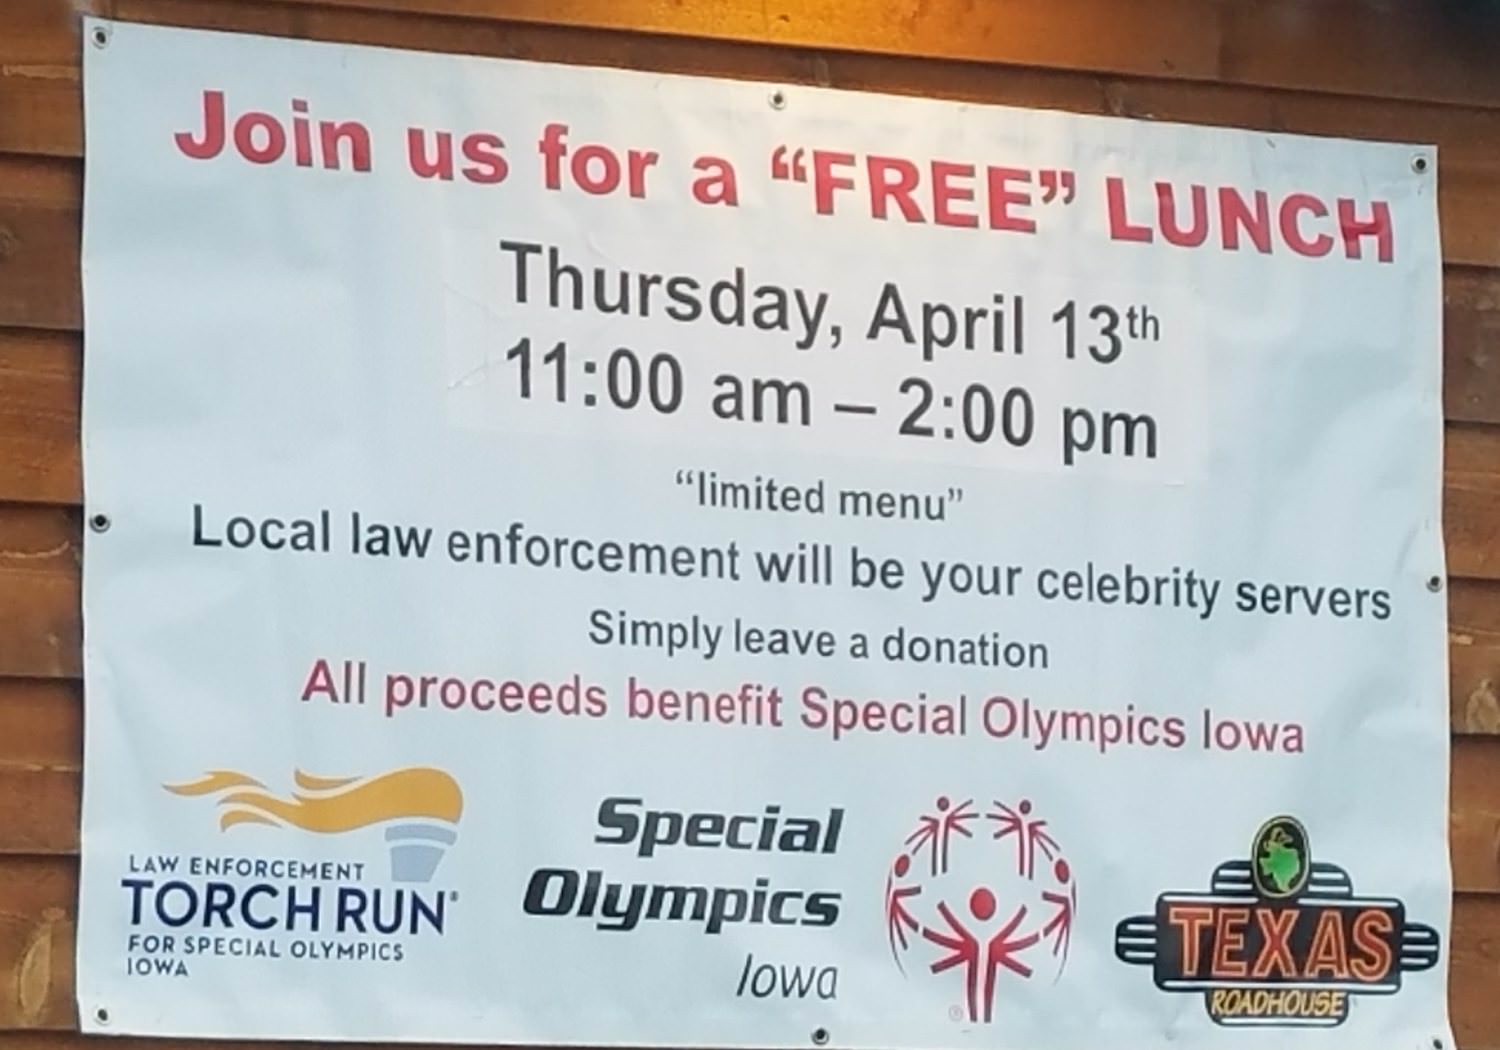 Free Lunch served by local law enforcement at Texas Road House